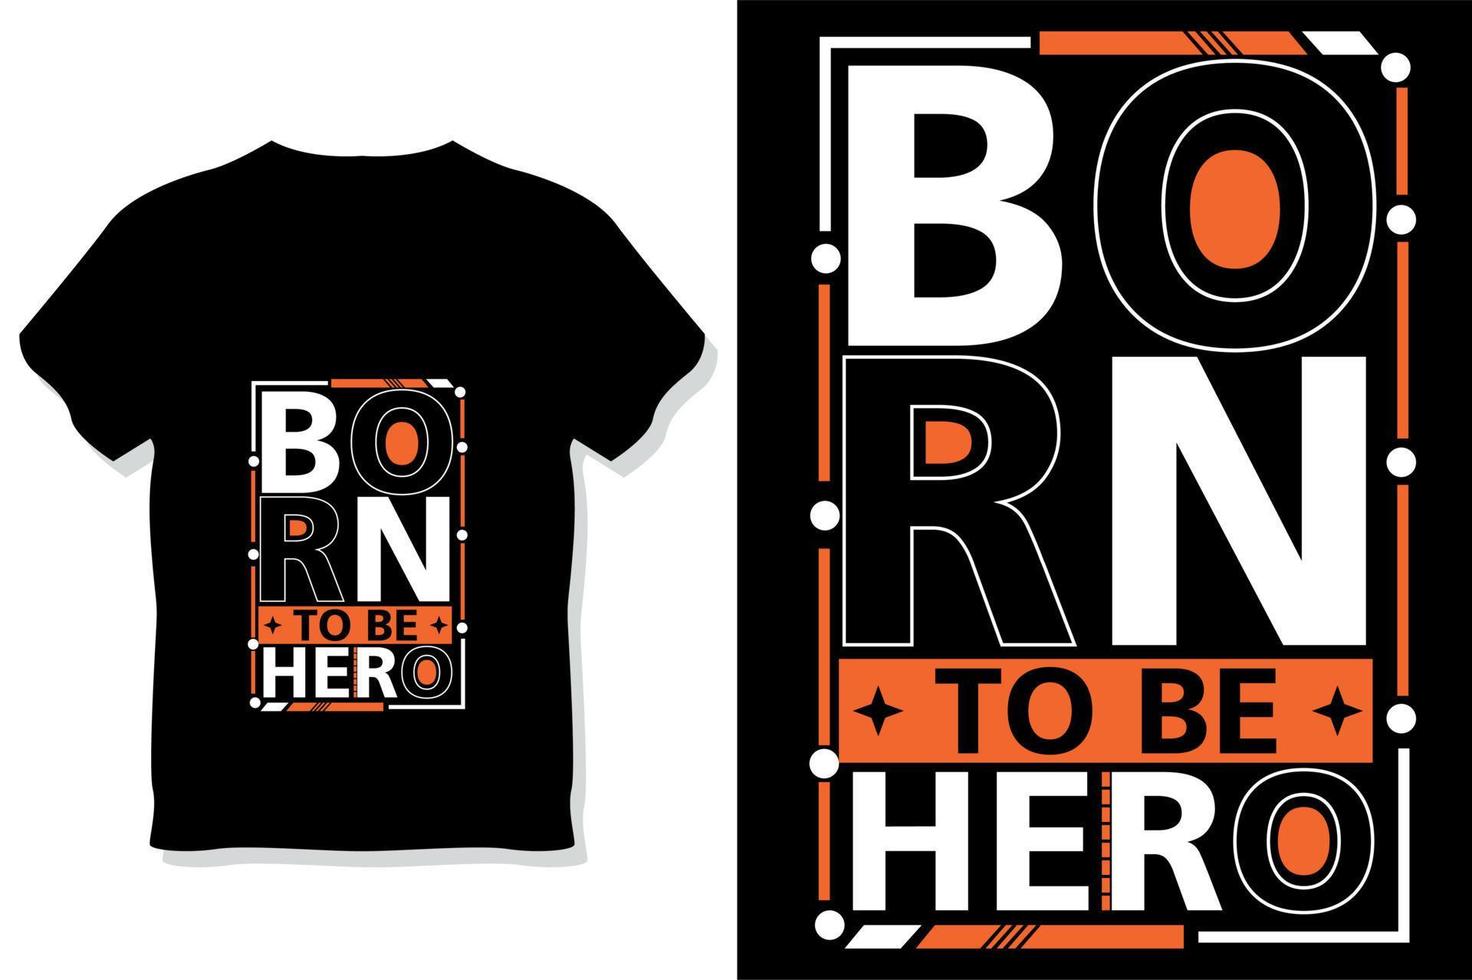 Born to be hero modern quotes t shirt design vector